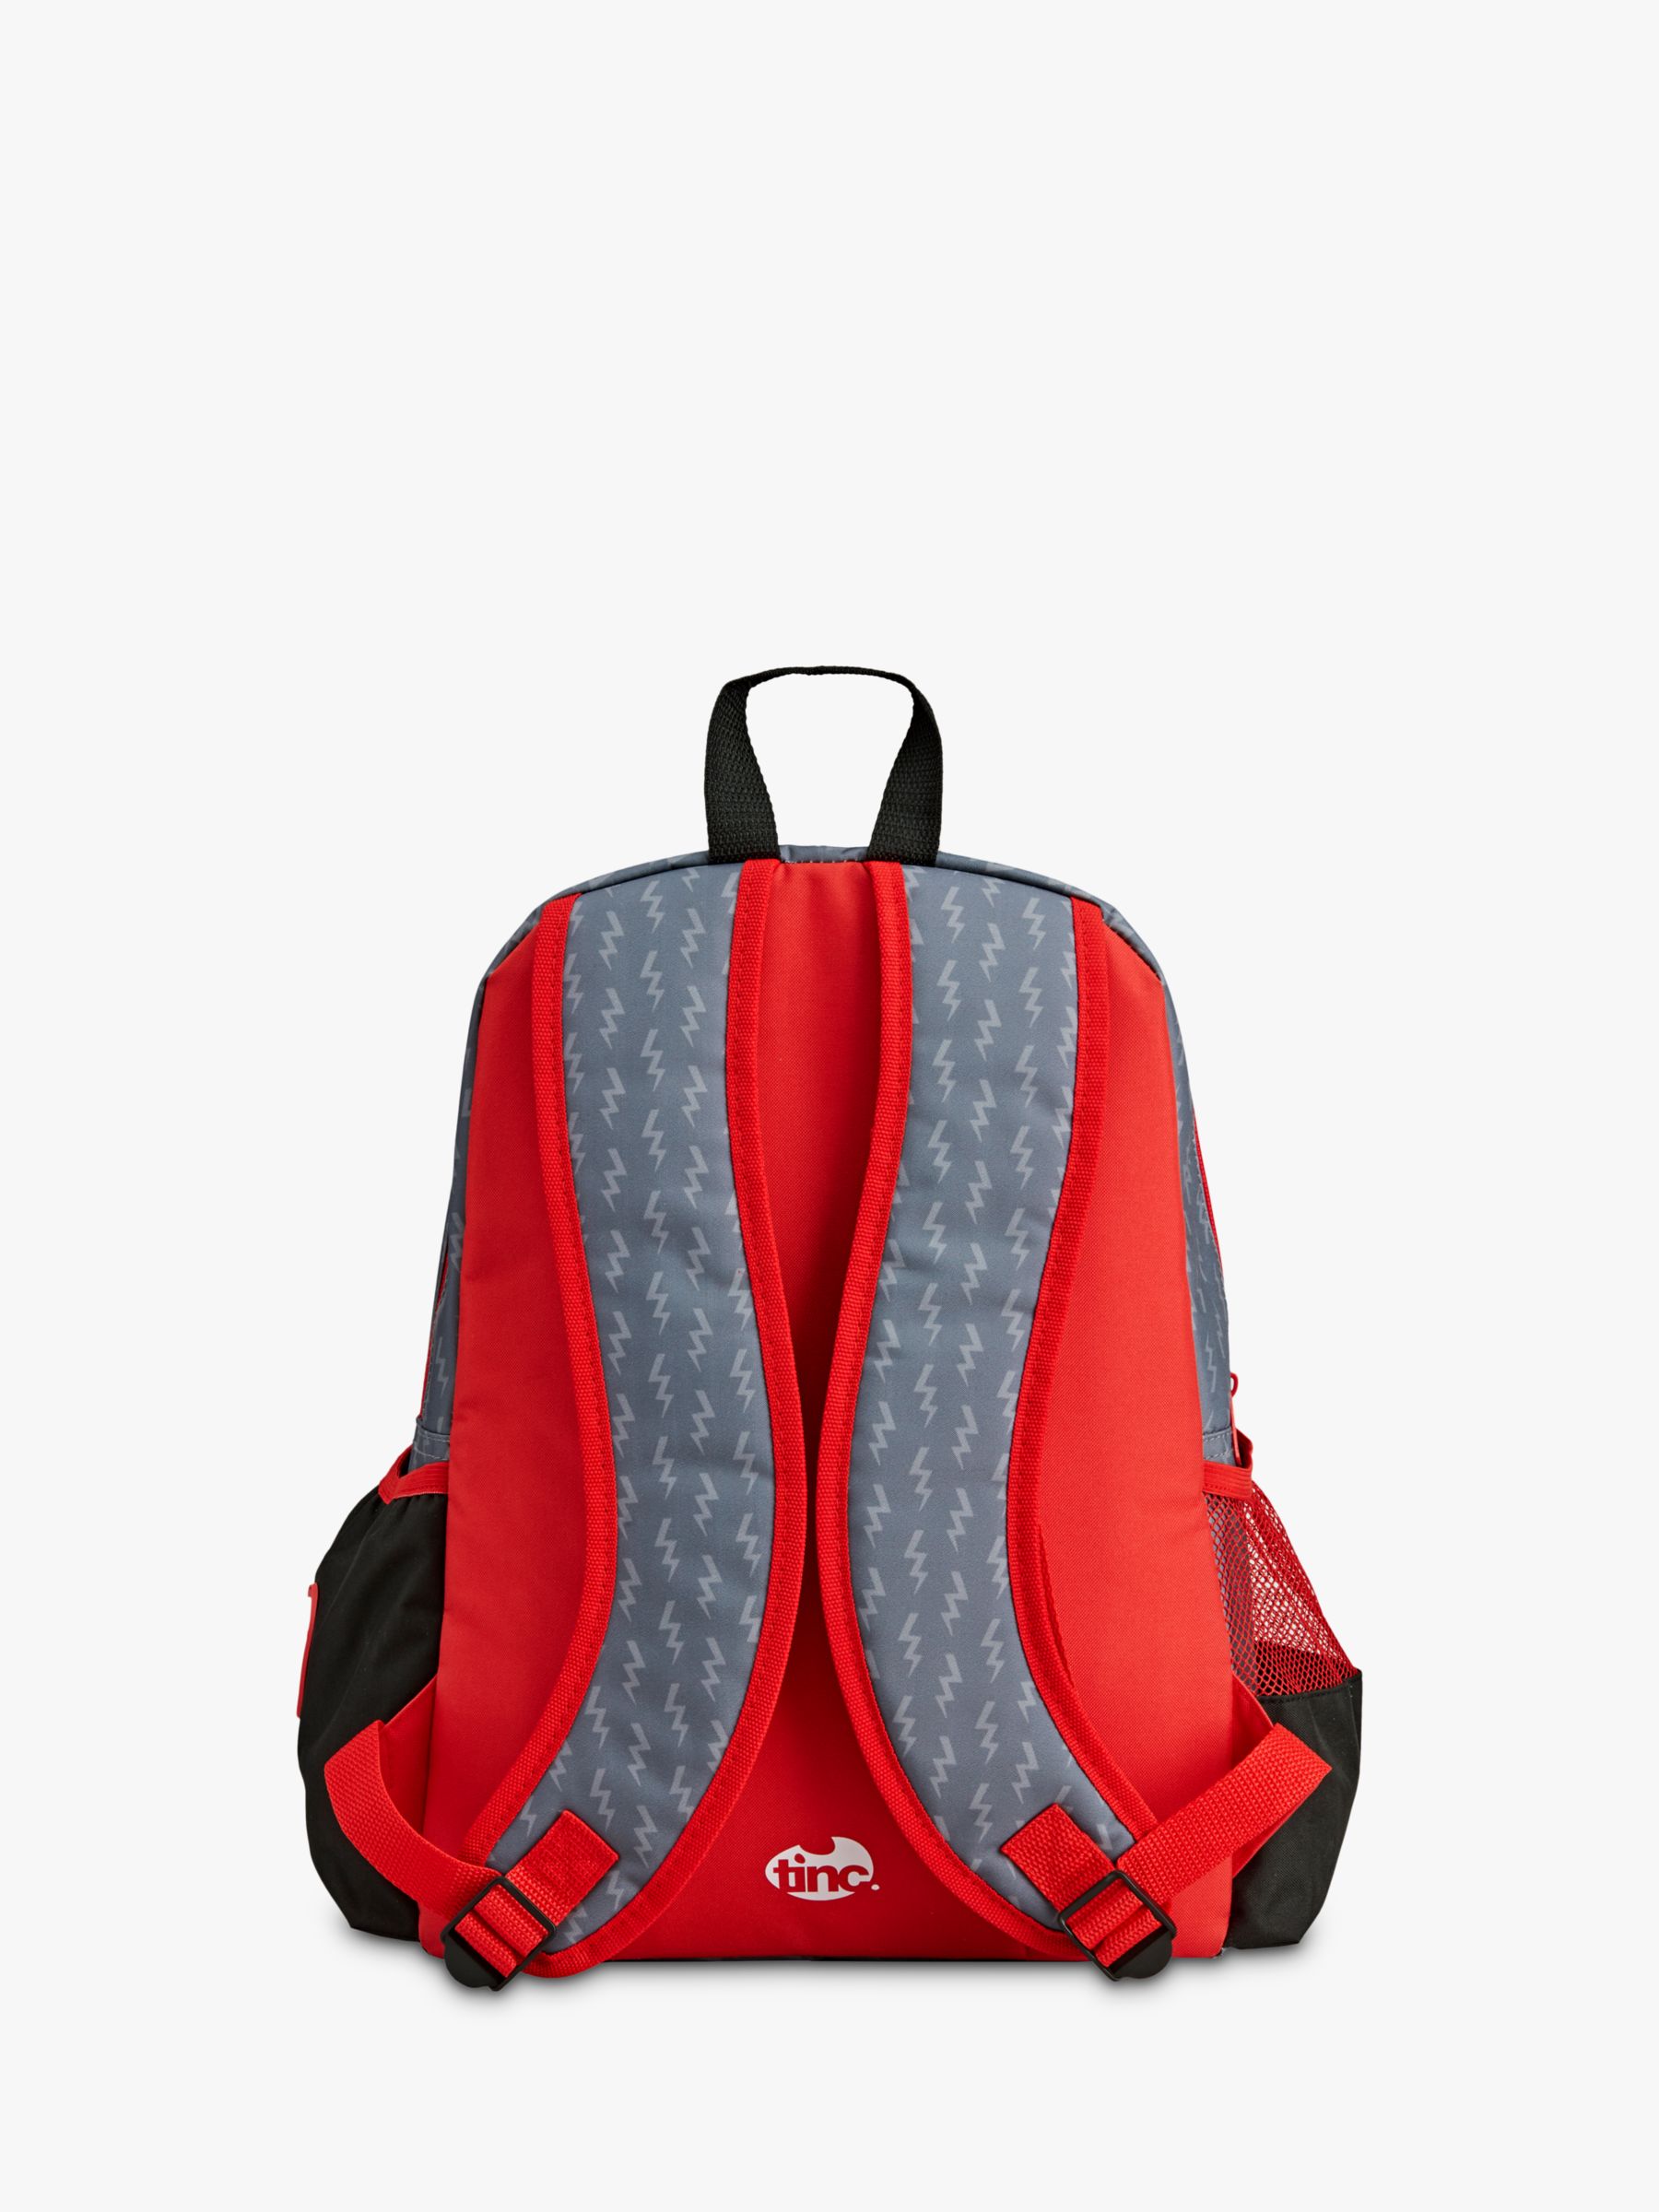 Tinc Kronk Expedition Children's Backpack at John Lewis & Partners